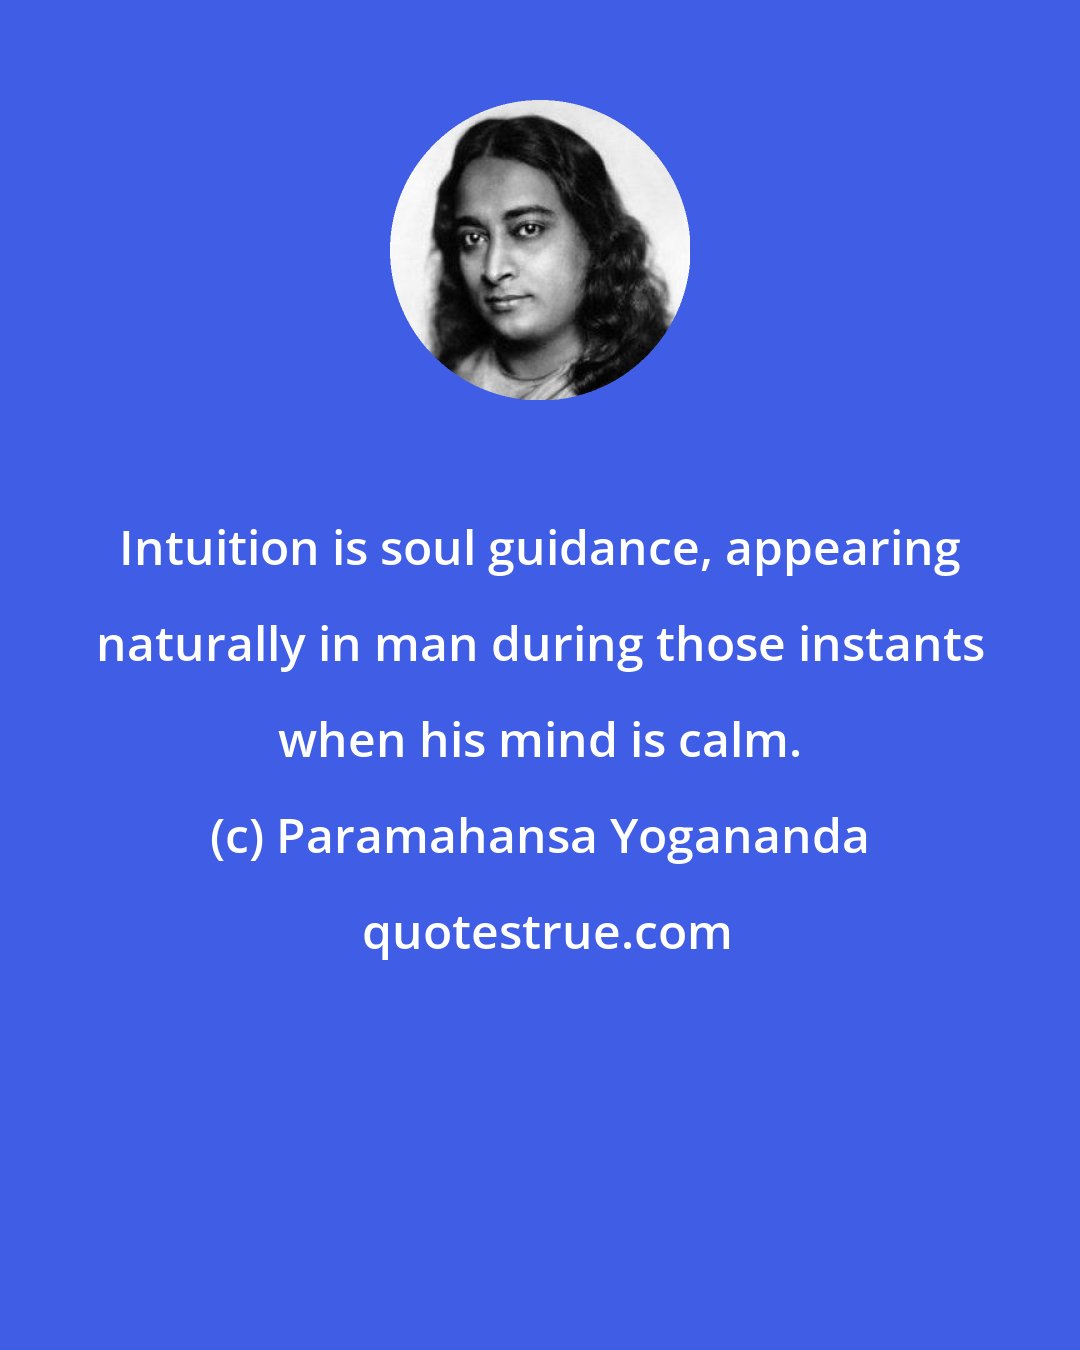 Paramahansa Yogananda: Intuition is soul guidance, appearing naturally in man during those instants when his mind is calm.